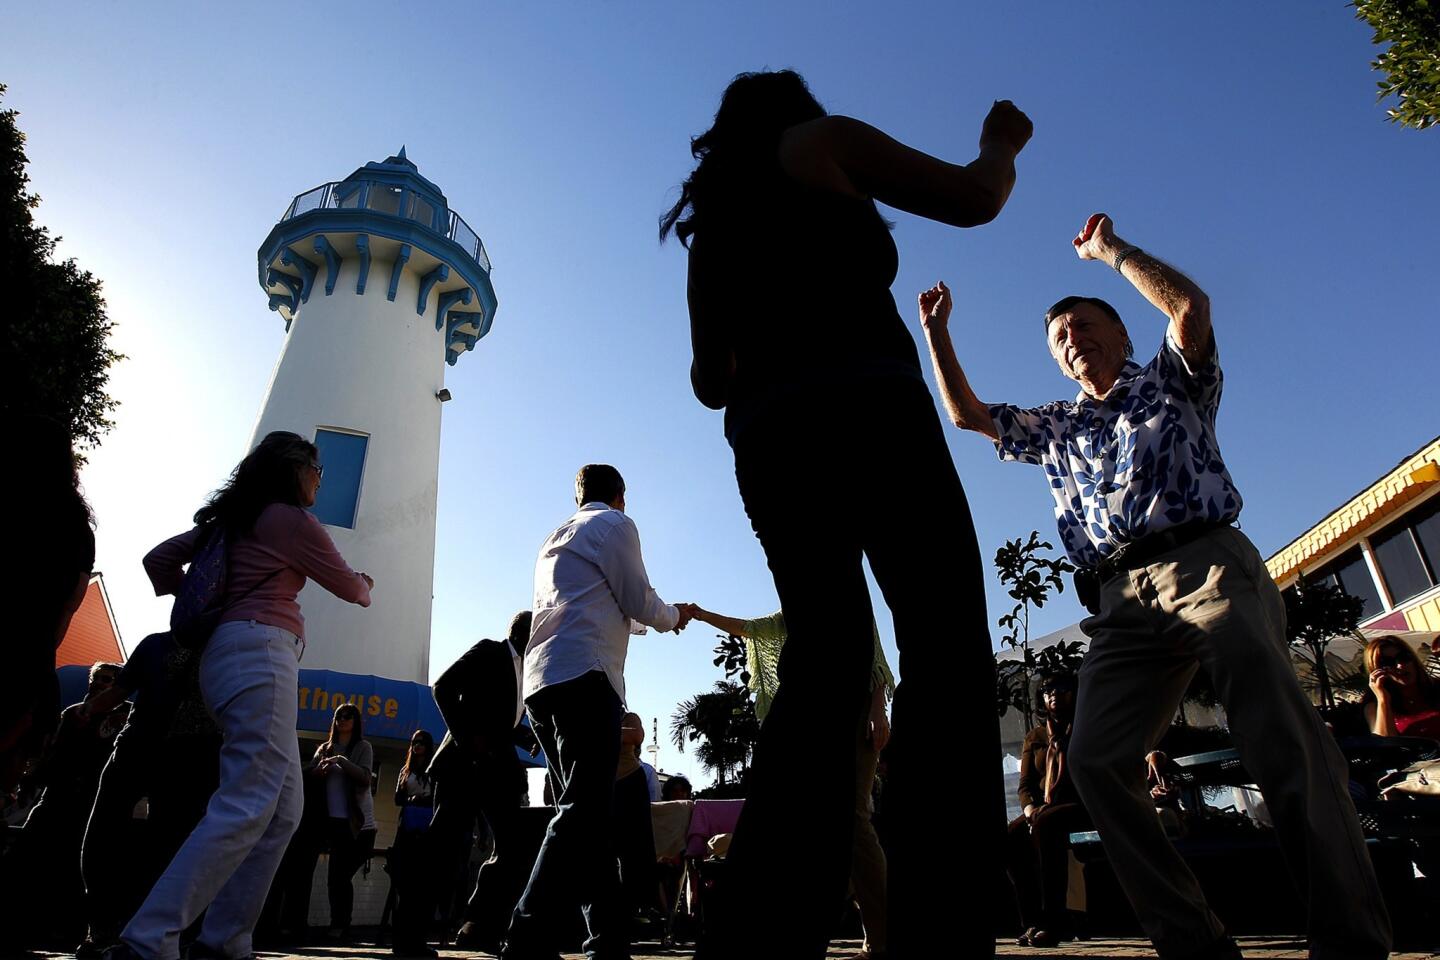 Visitors dance to live music at Fisherman's Village in Marina del Rey. Los Angeles County planners have been working on a new vision plan that will help guide the marina's development over the next several decades.